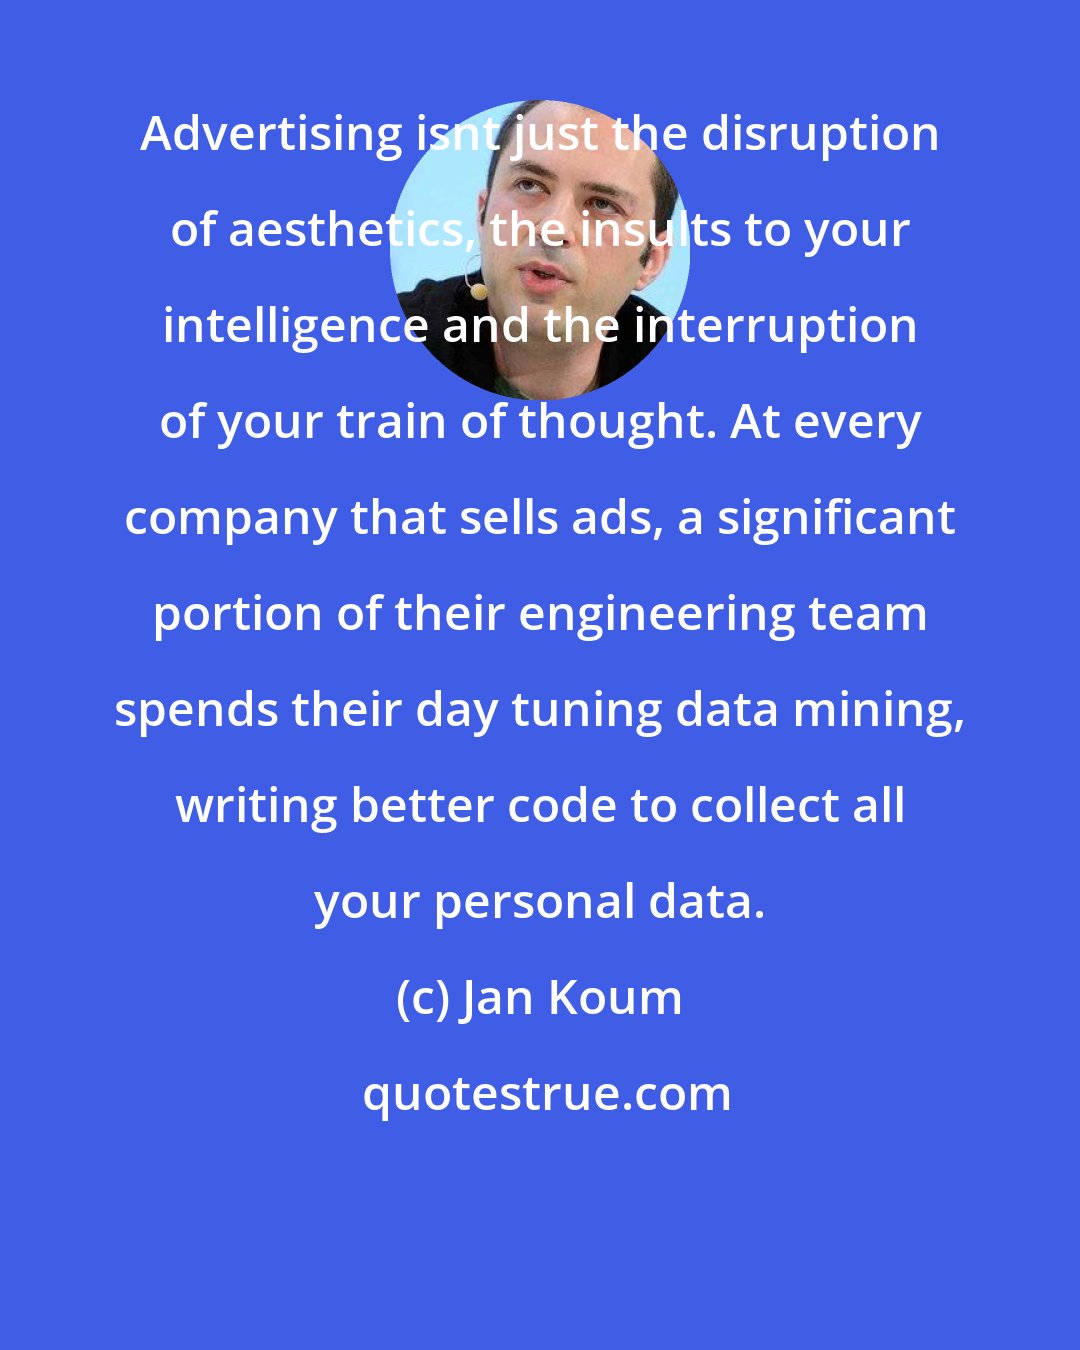 Jan Koum: Advertising isnt just the disruption of aesthetics, the insults to your intelligence and the interruption of your train of thought. At every company that sells ads, a significant portion of their engineering team spends their day tuning data mining, writing better code to collect all your personal data.